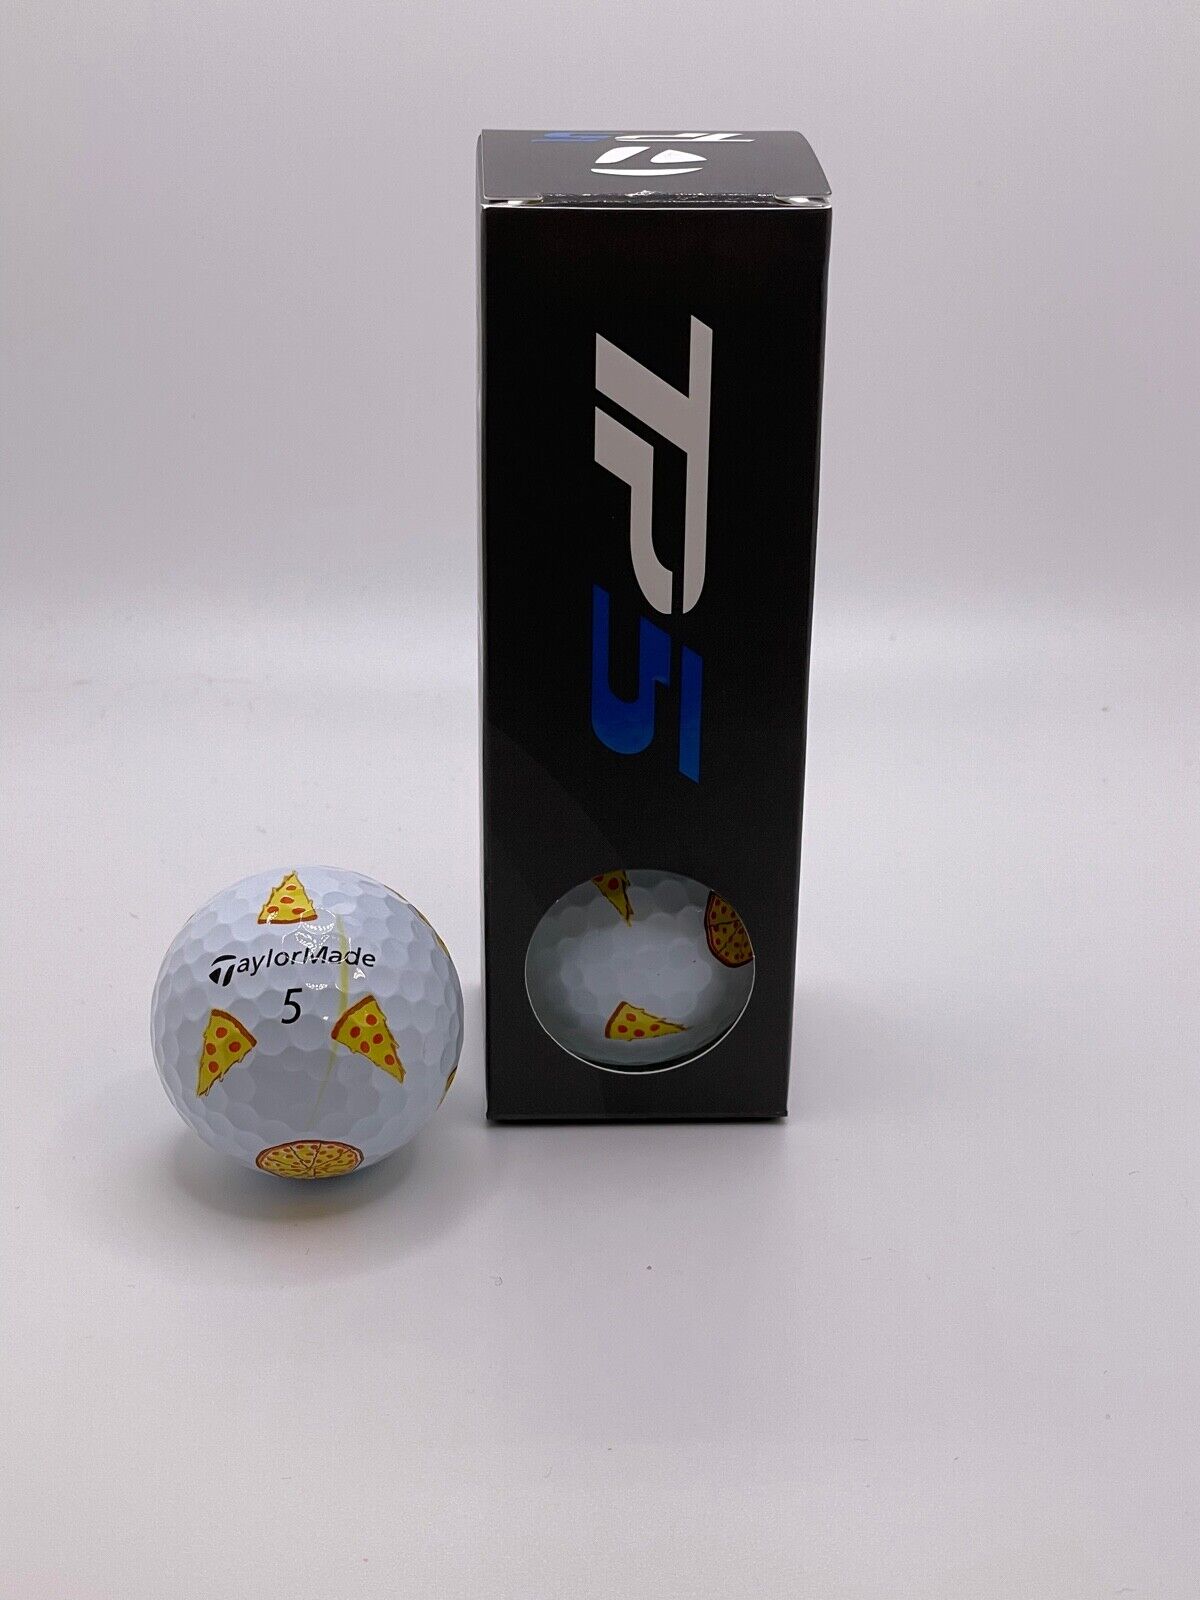 TaylorMade TP5 Pix SE Balls *SOLD OUT* Masters $ Pizza Bacon Egg Aloha Cheers